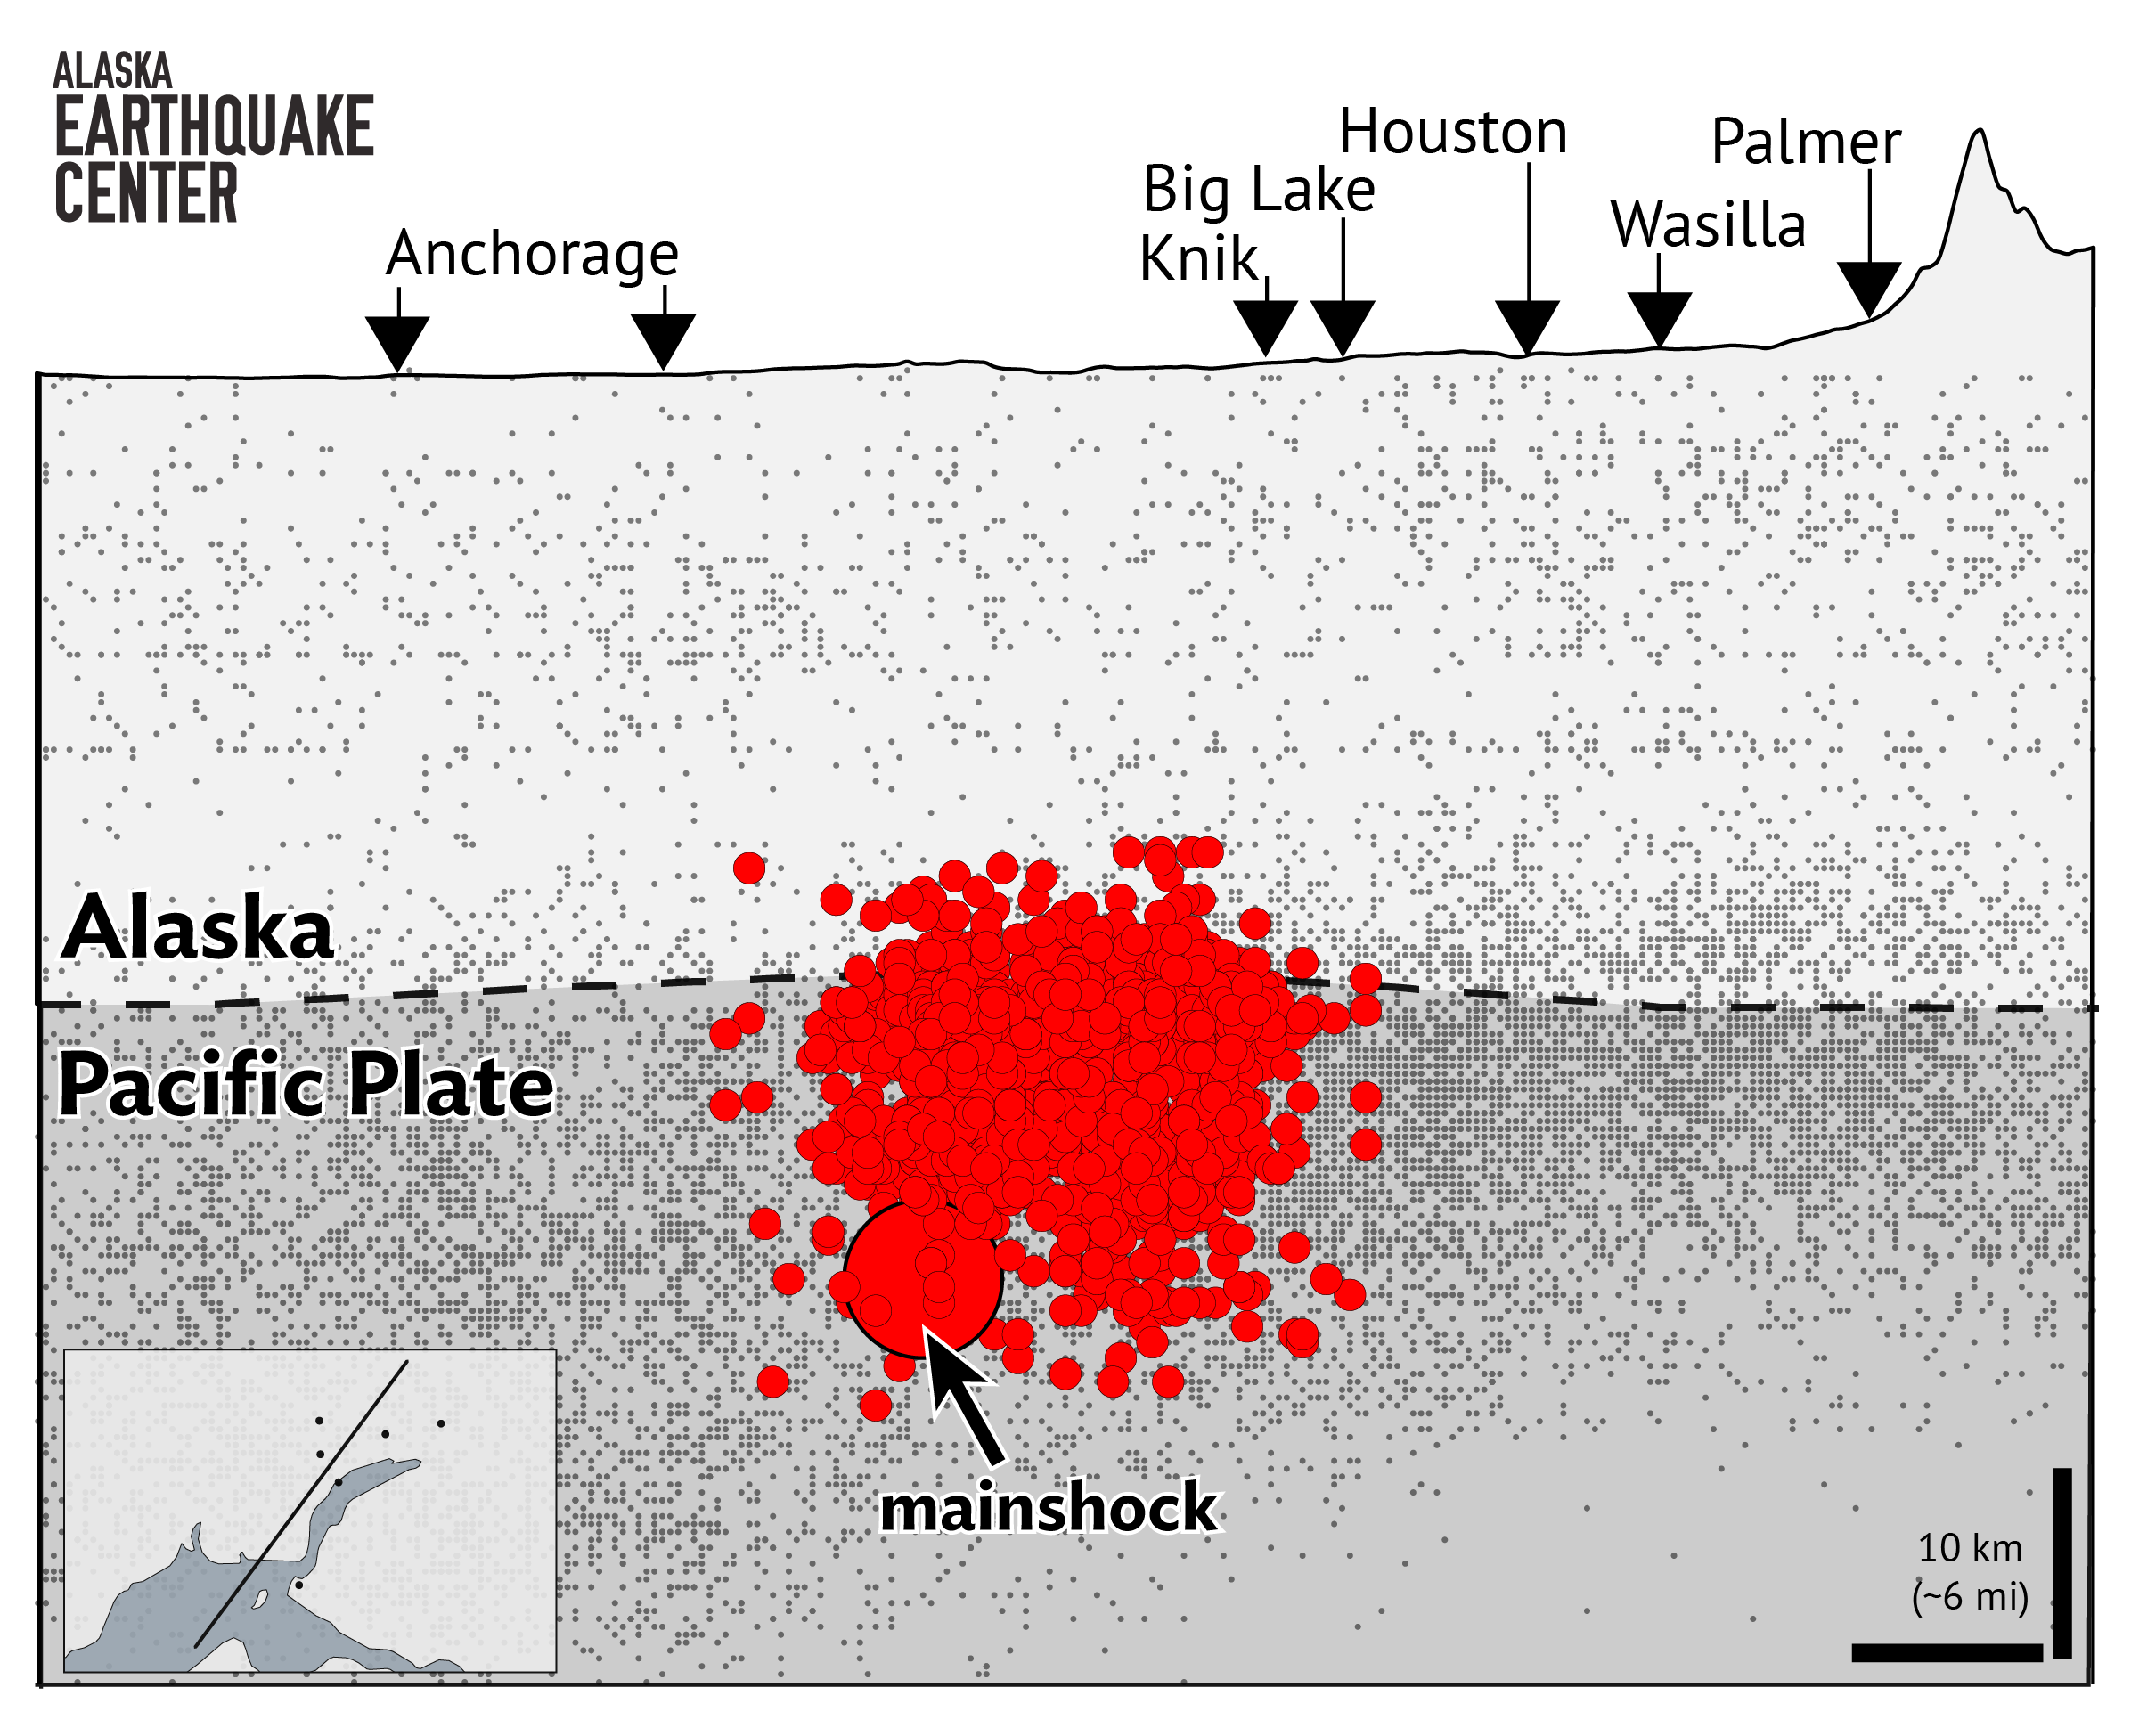 Cross-section through Friday’s earthquake and subsequent aftershocks. 